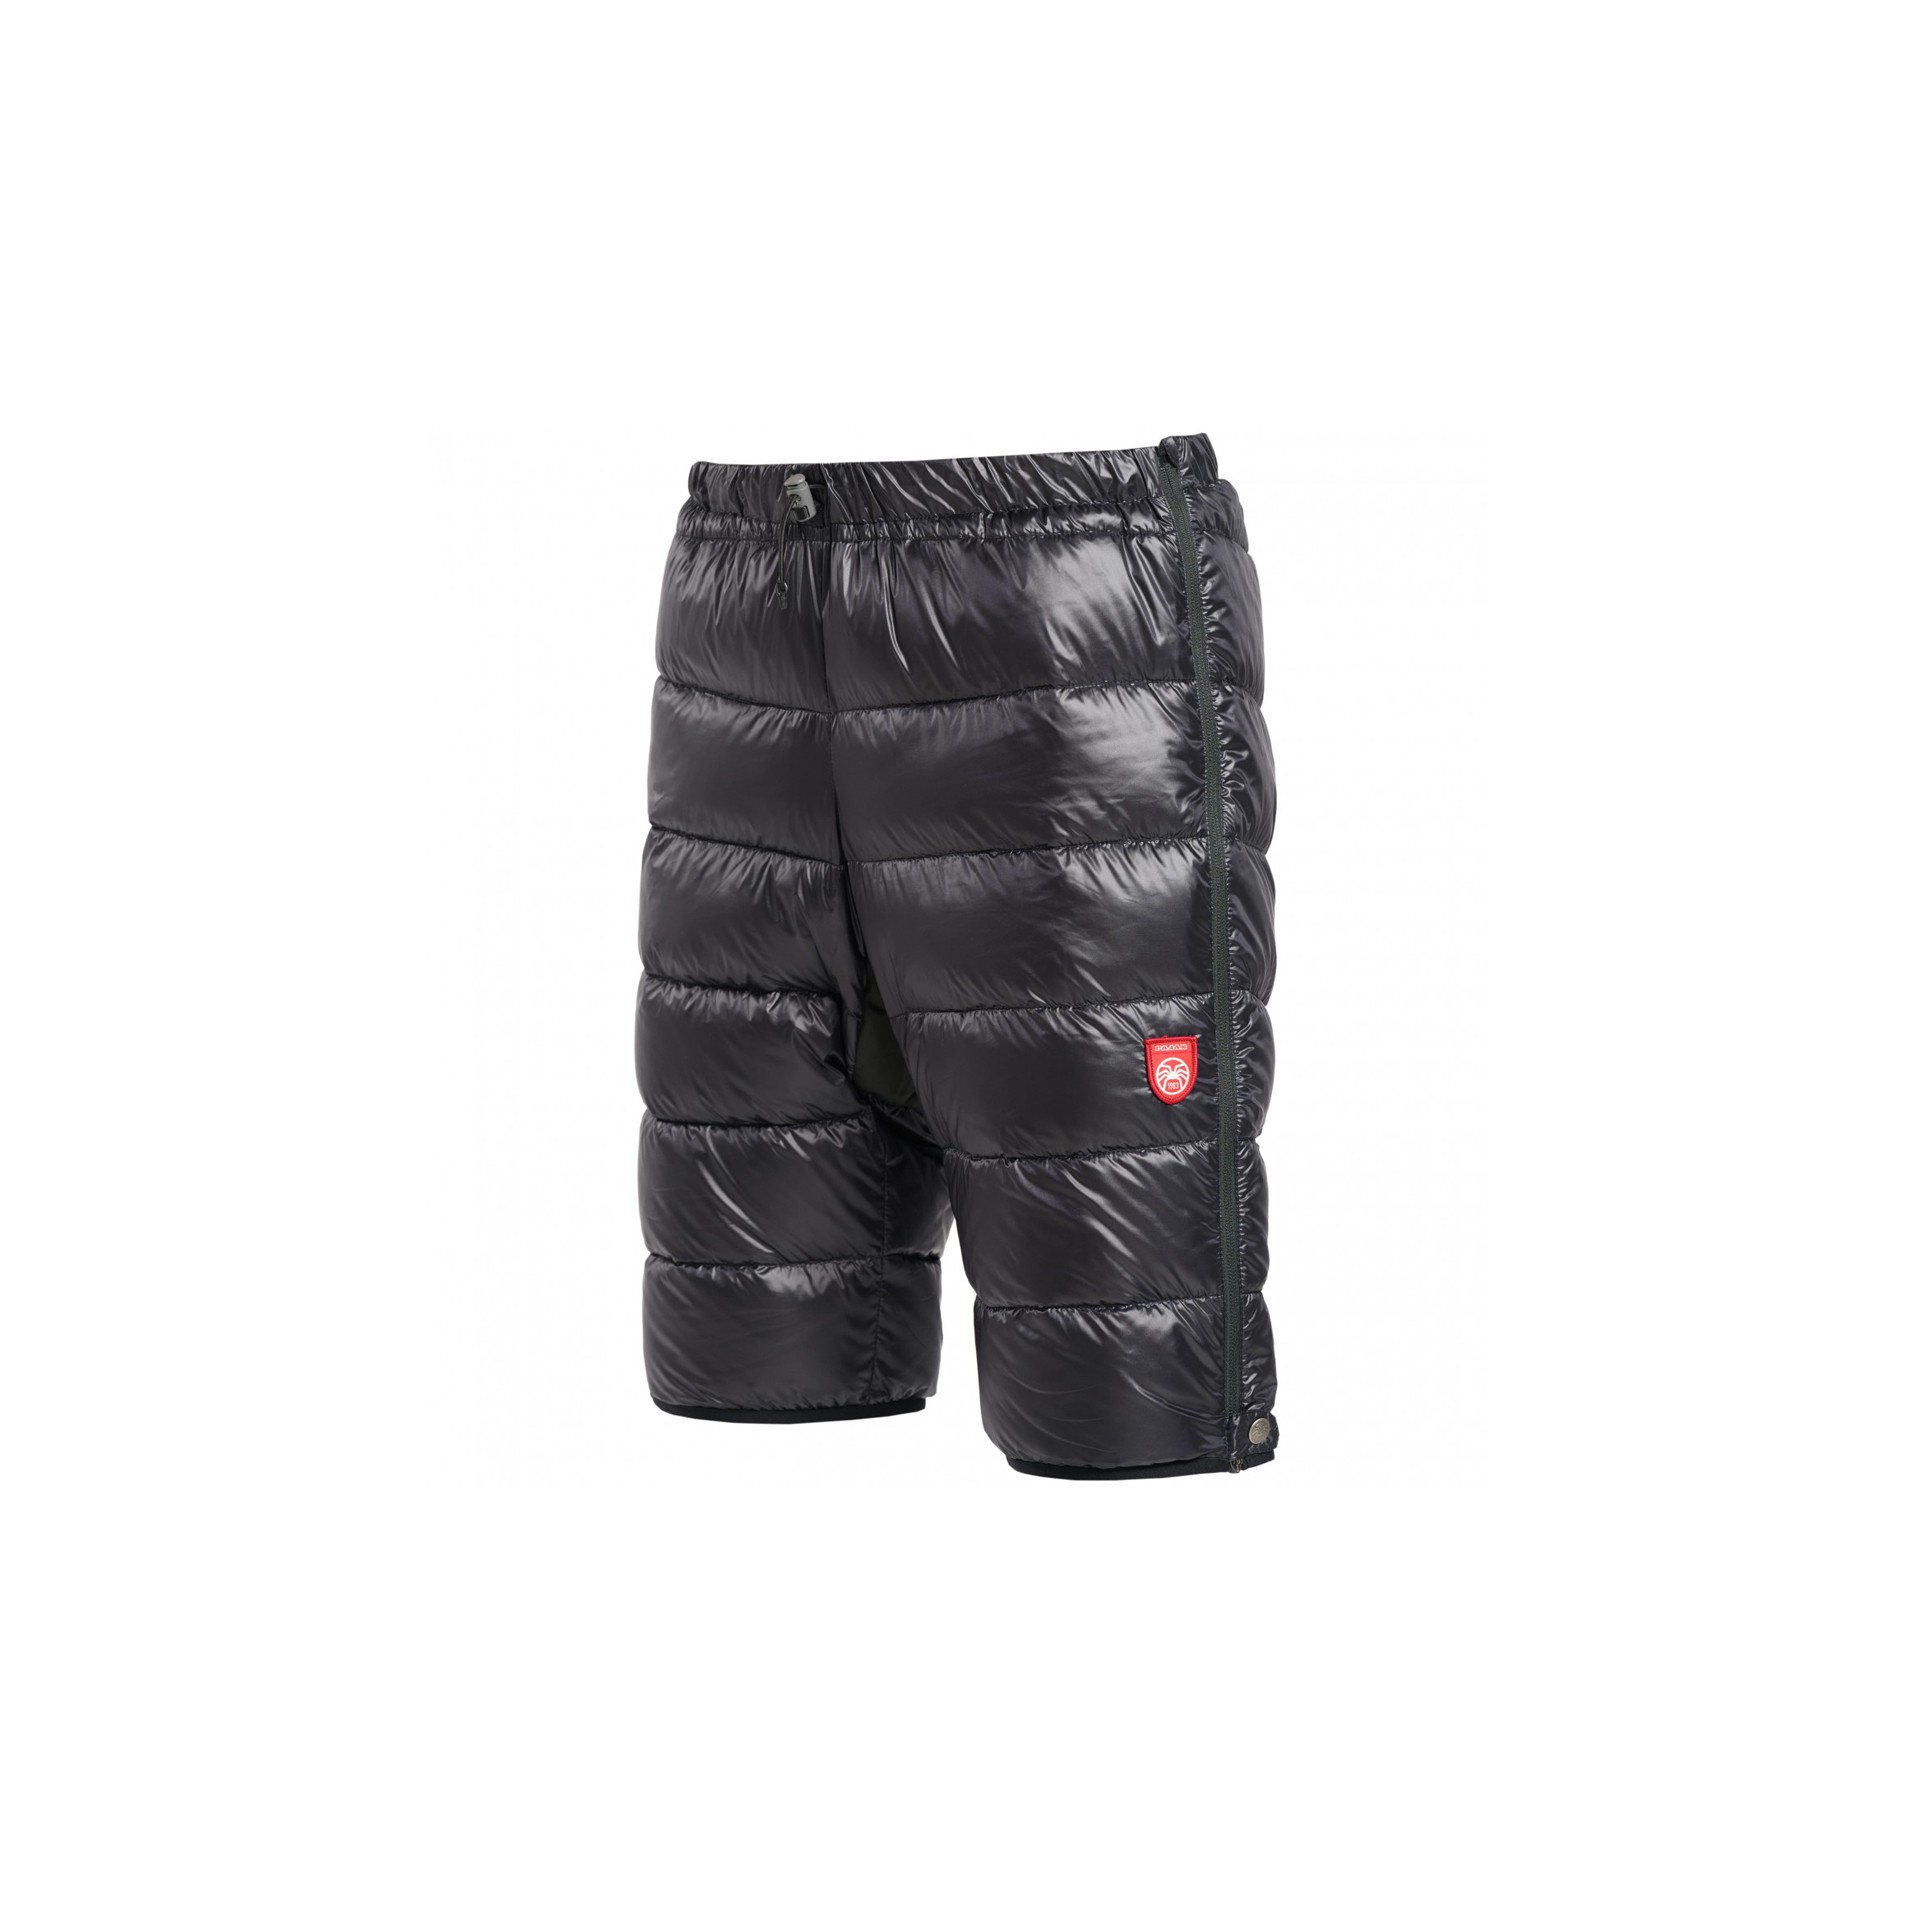 Spodenki puchowe GHOST SHORTS